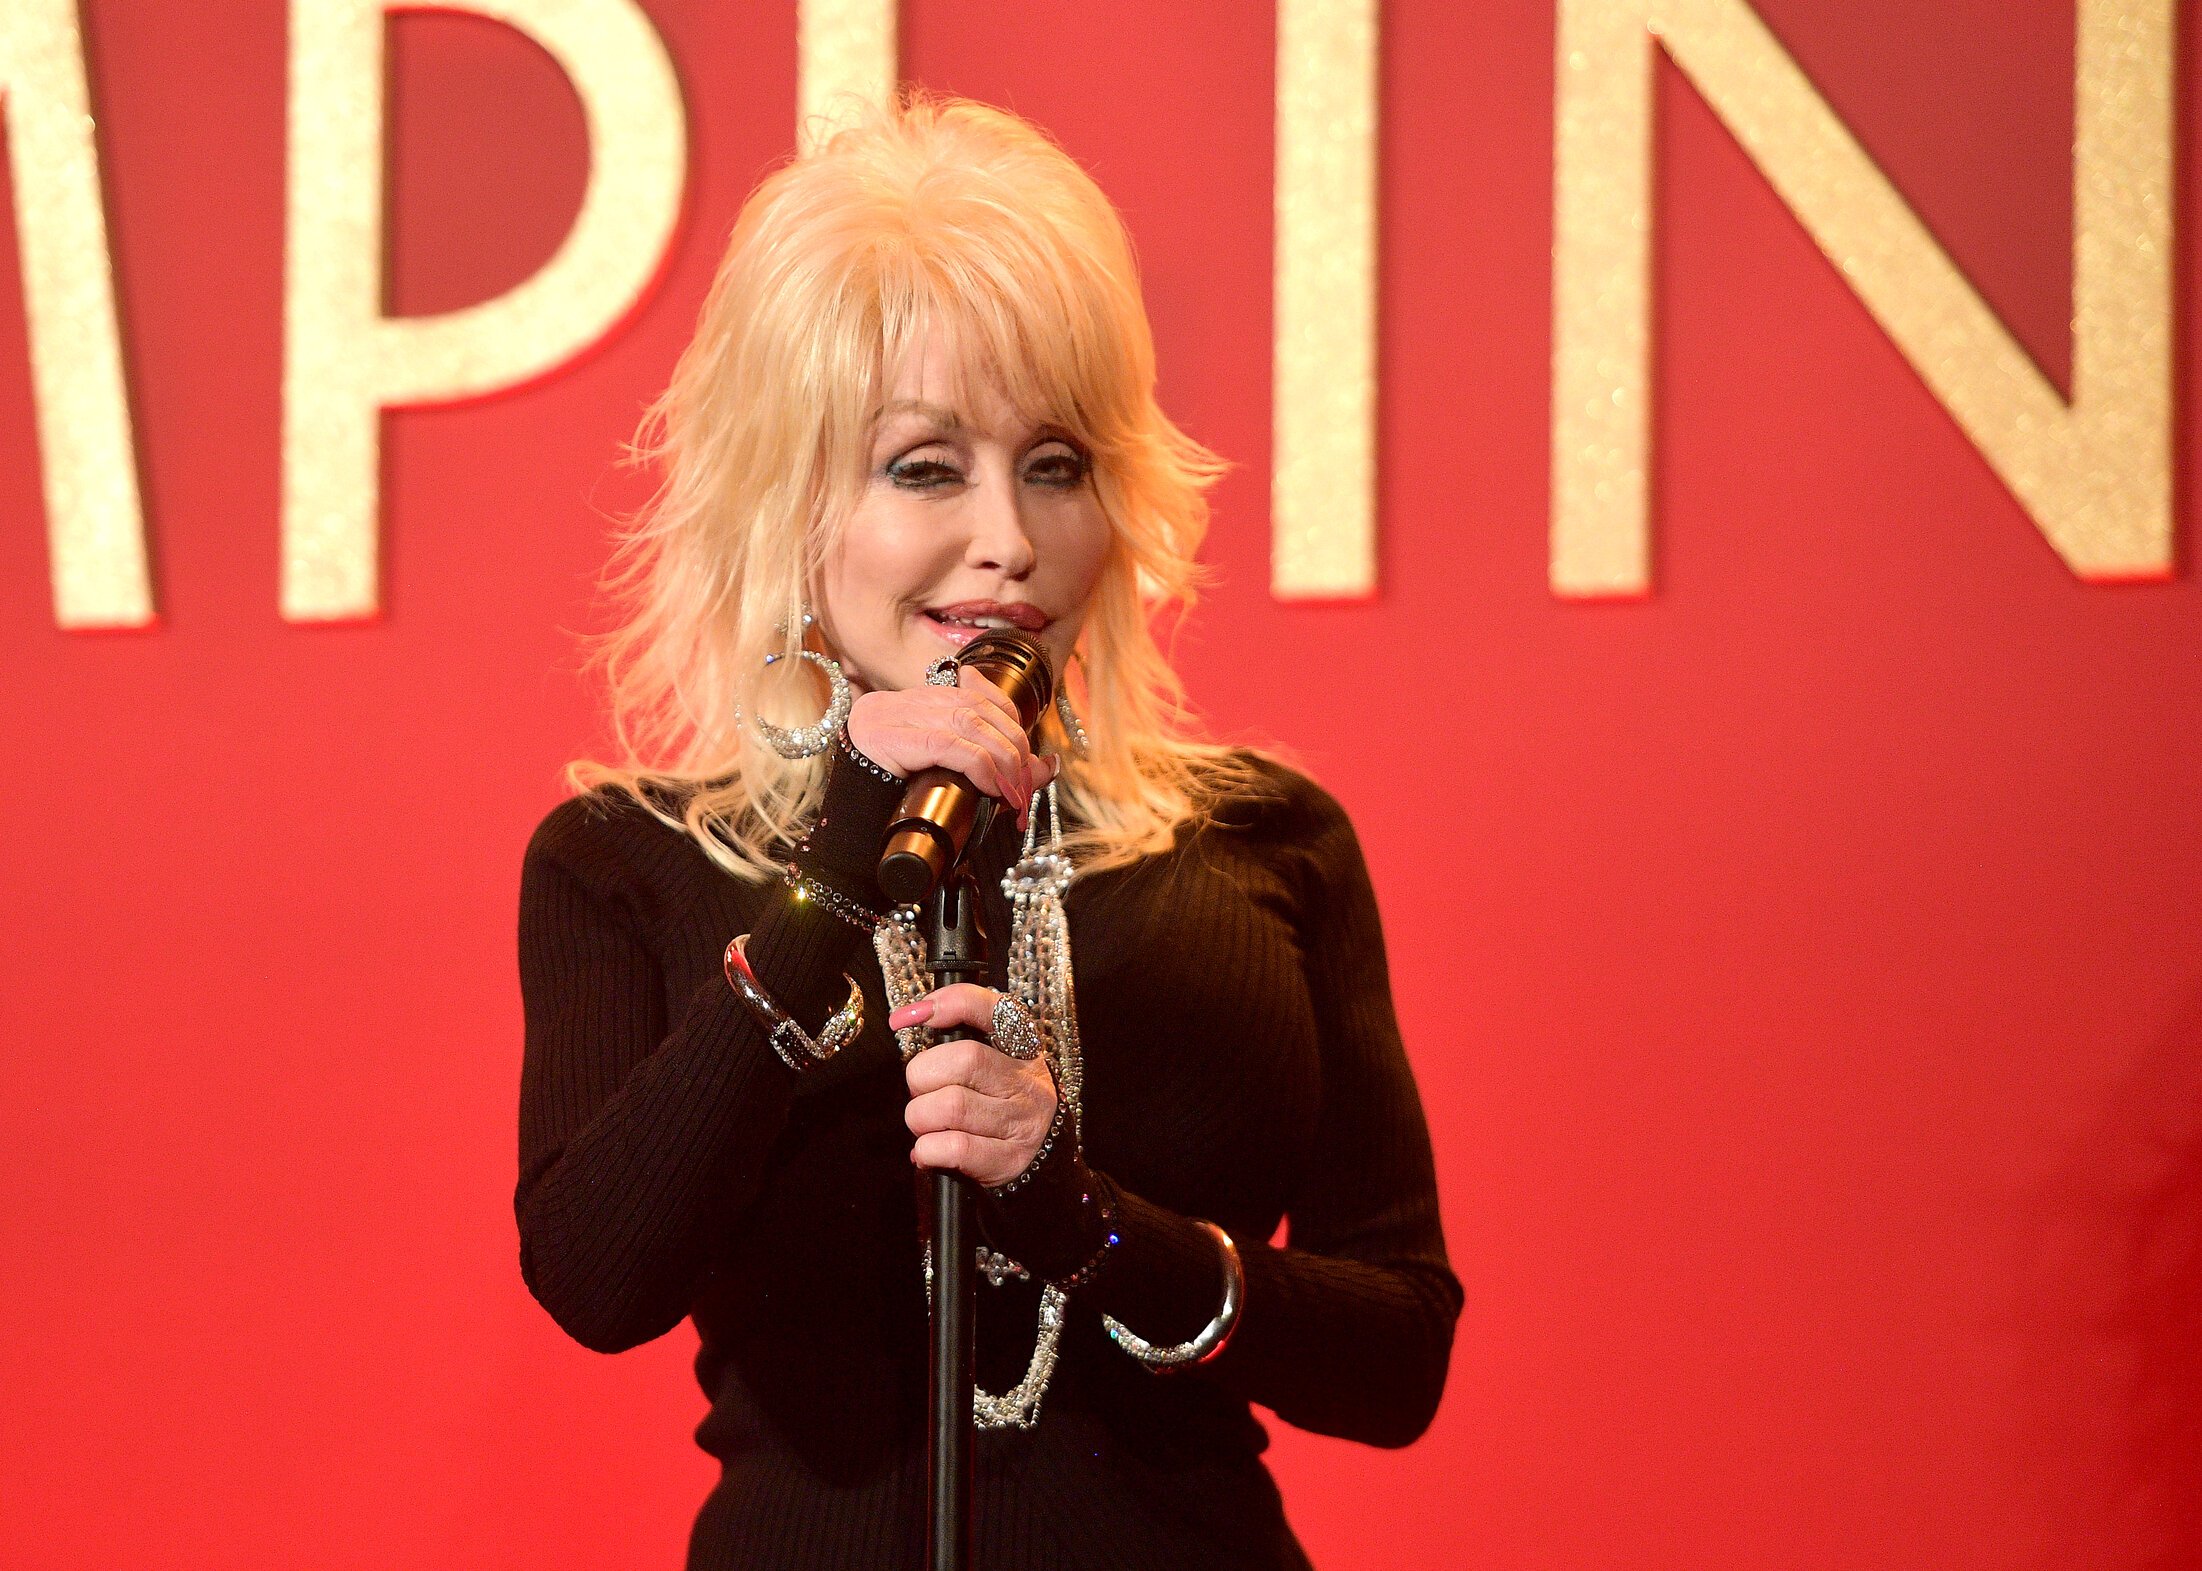 Dolly Parton performs onstage at a luncheon for the Netflix Film Dumplin' at the Four Seasons Hotel Los Angeles at Beverly Hills on October 22, 2018.